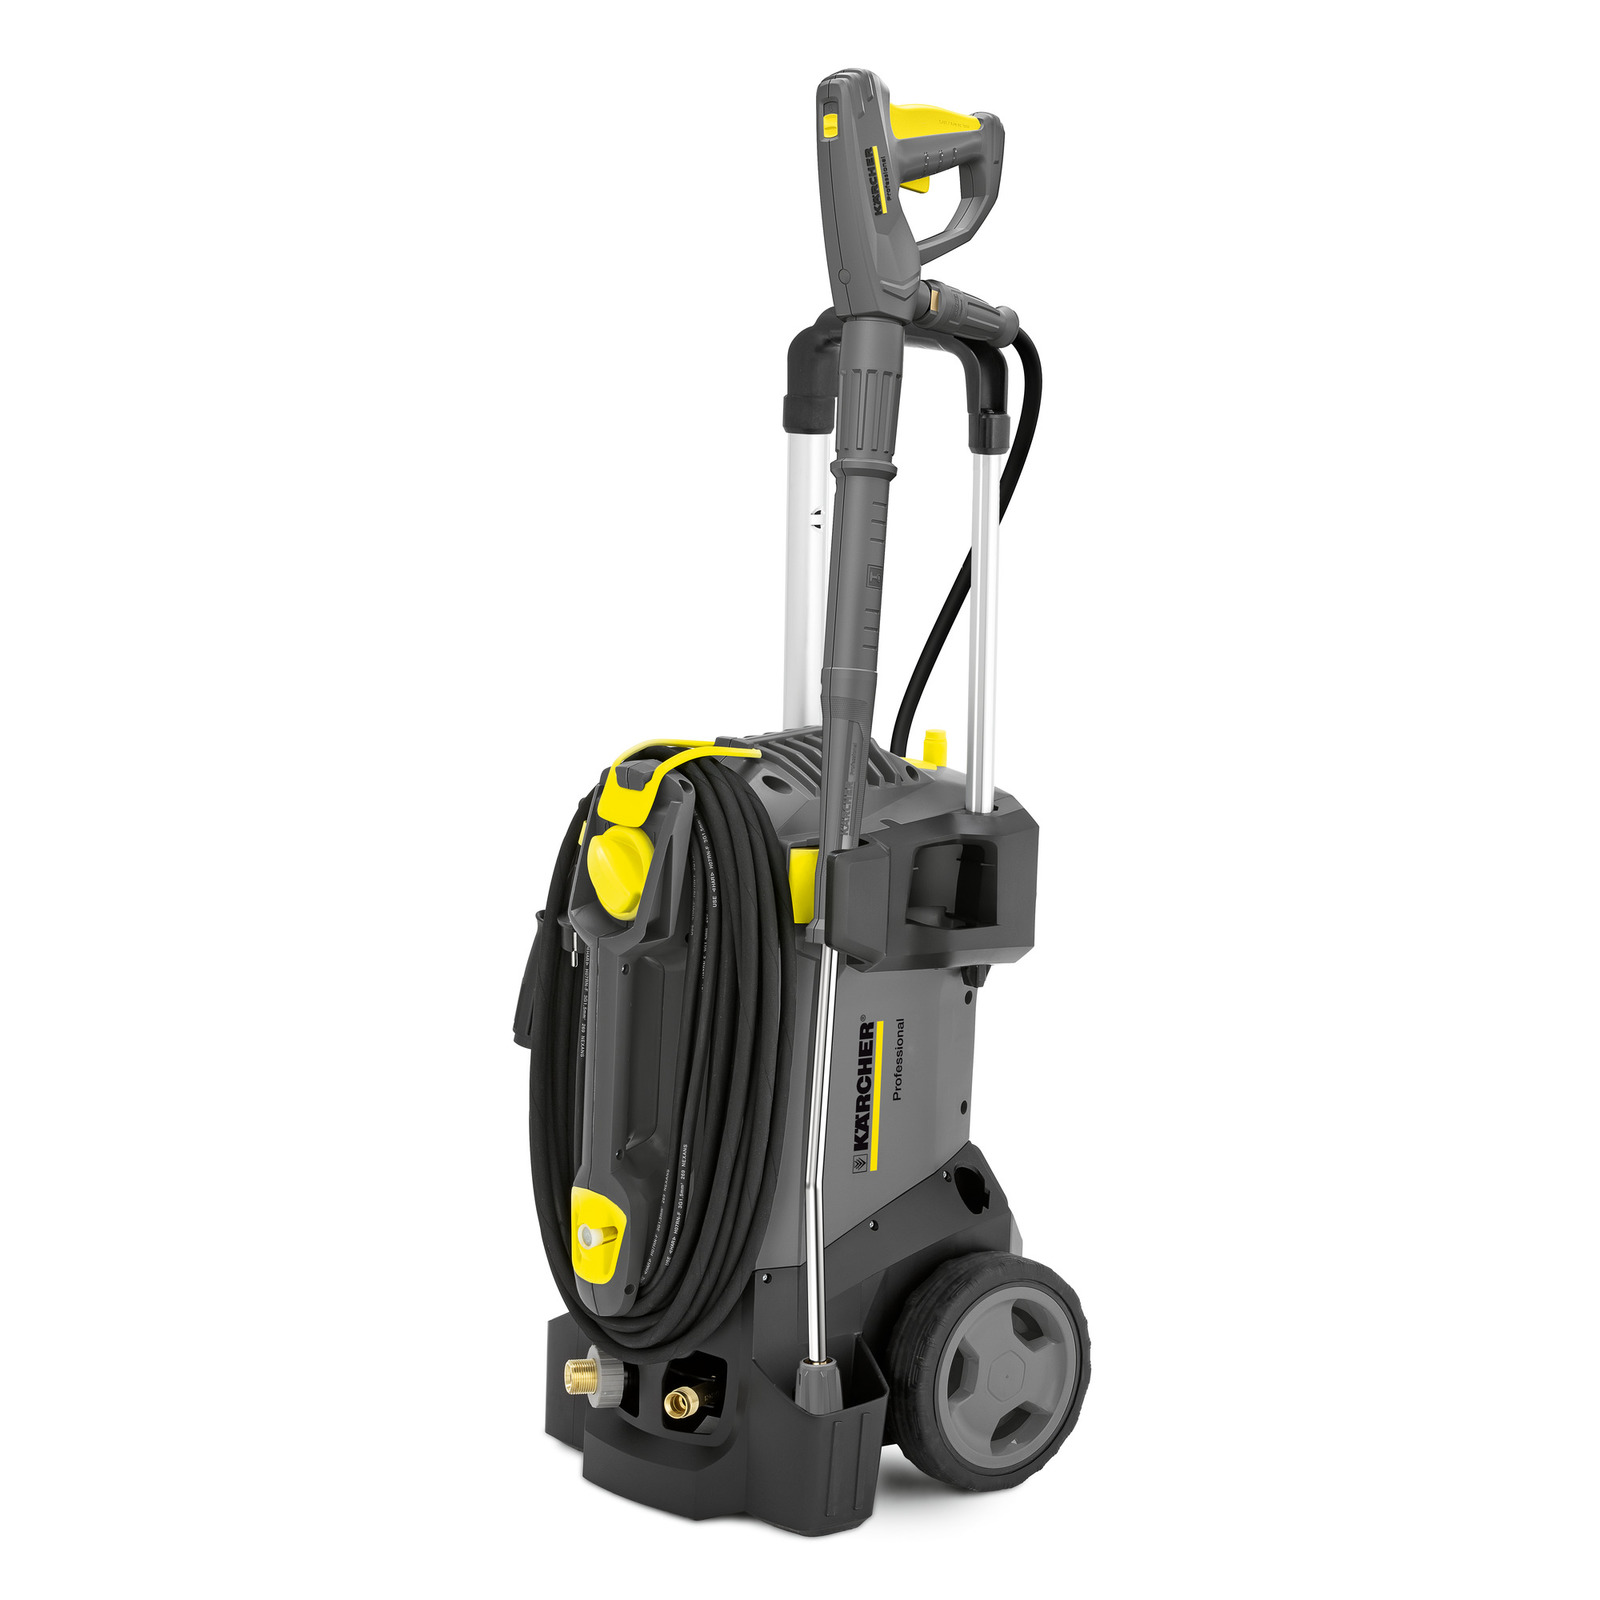 Karcher 1.520-916.0 Professional Cold Water Electric Pressure Washer 1.8 GPM 1300PSI  HD 1.8/13 C GTIN 886622014485